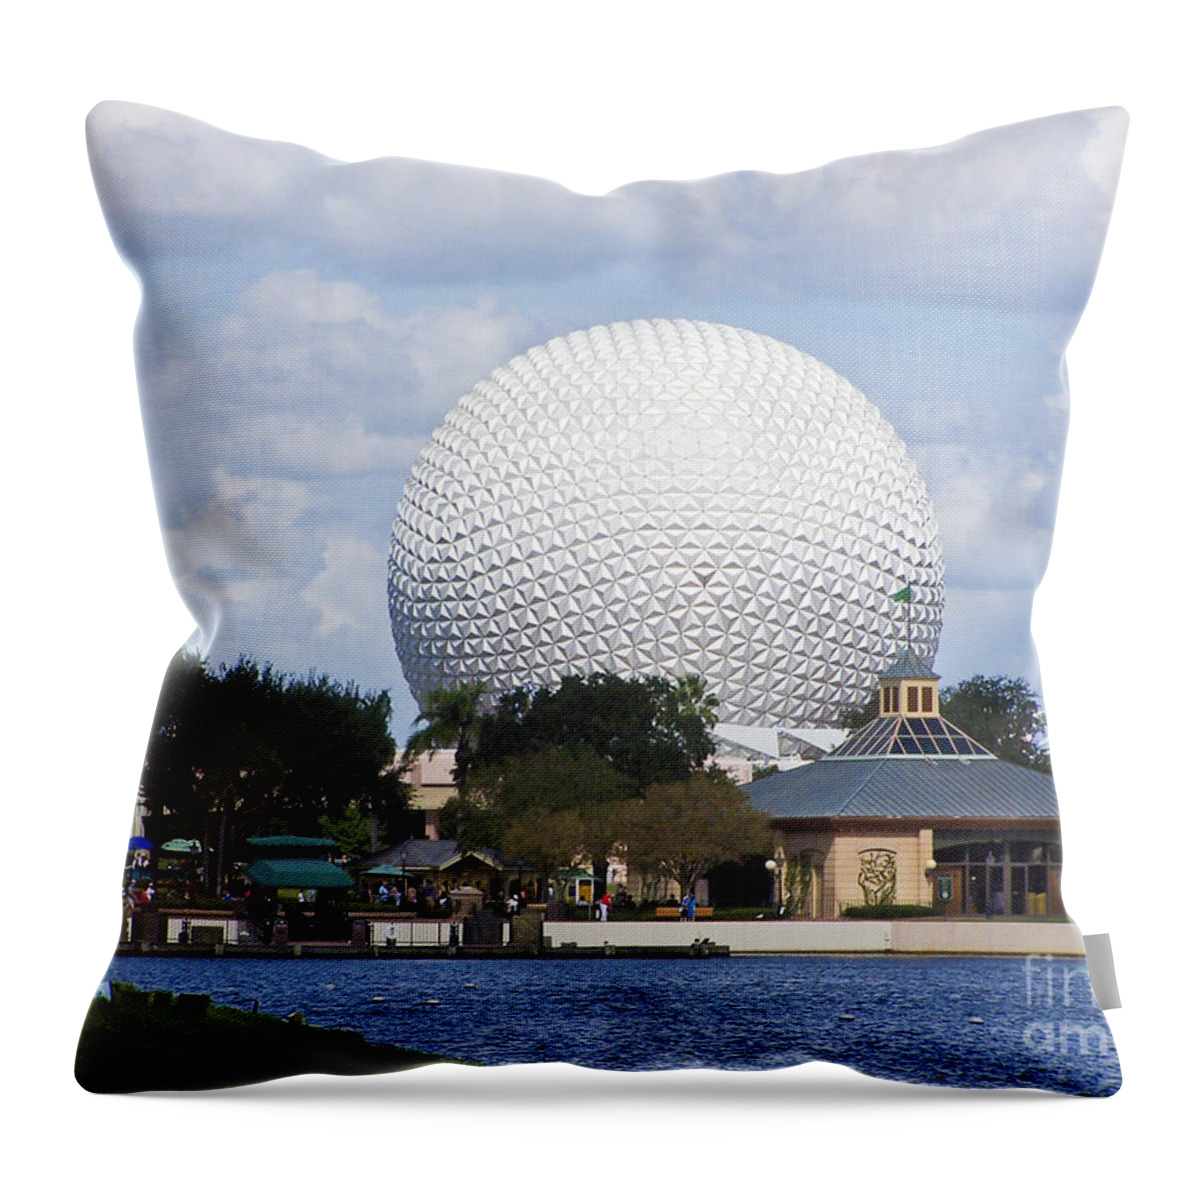 Spaceship Earth Throw Pillow featuring the photograph Spaceship Earth at Epcot by Tom Doud